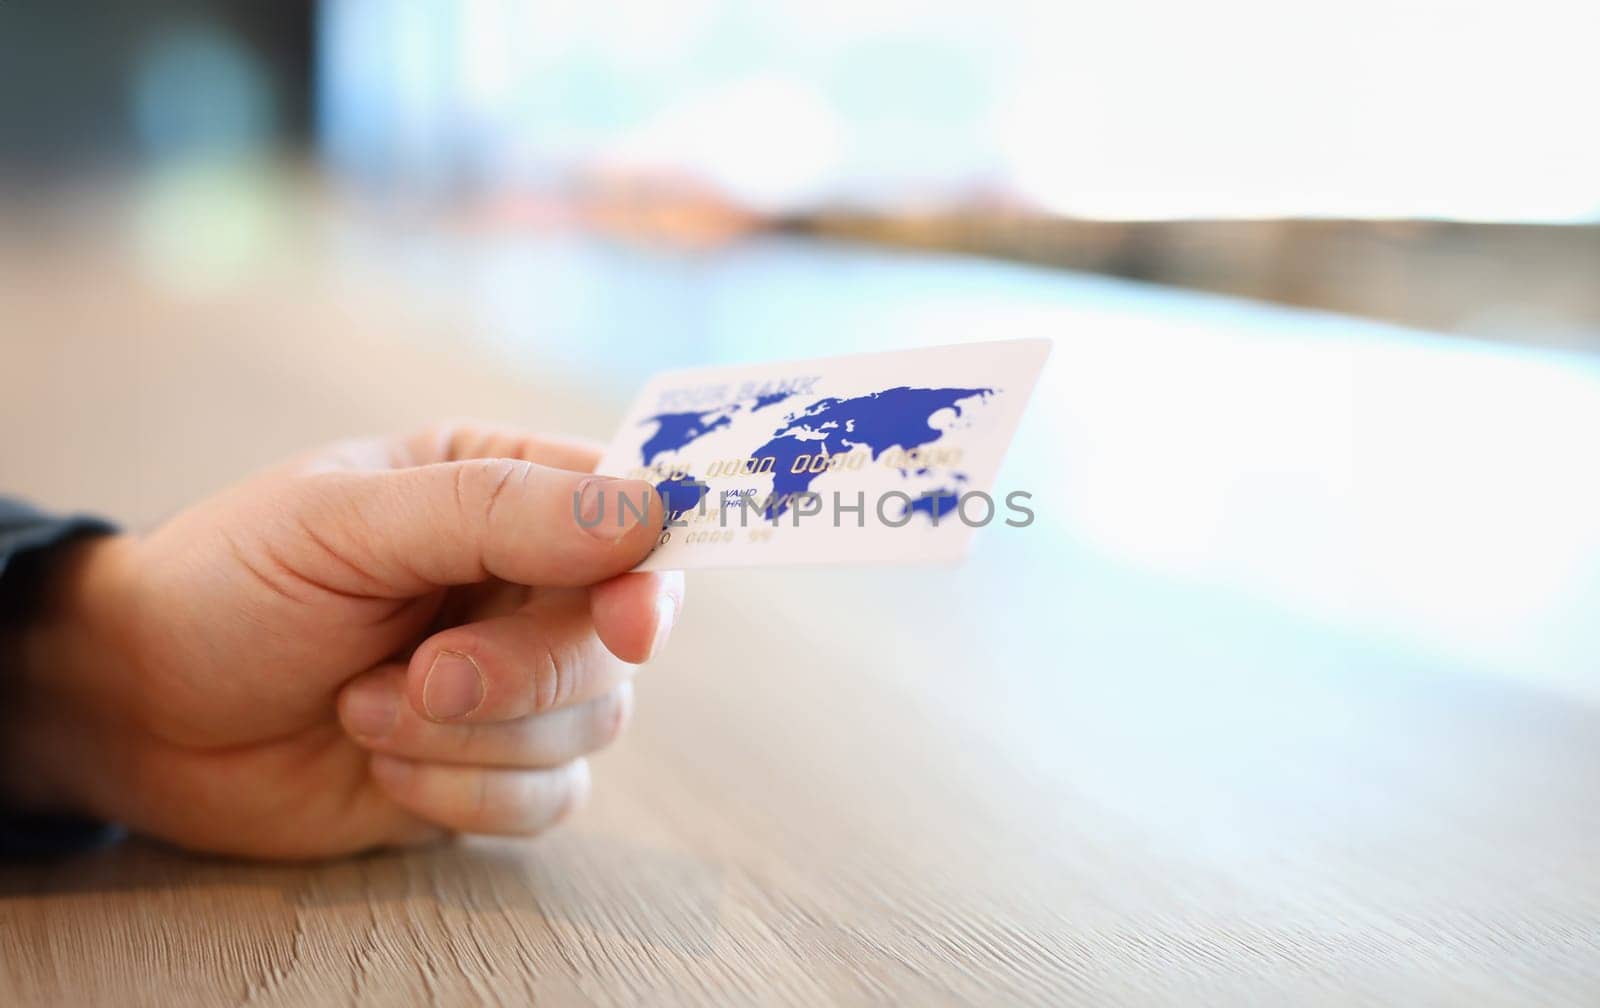 Close-up view of person hand holding white and blue plastic credit card. Online payment via internet or contactless terminal. Modern technology and progress concept